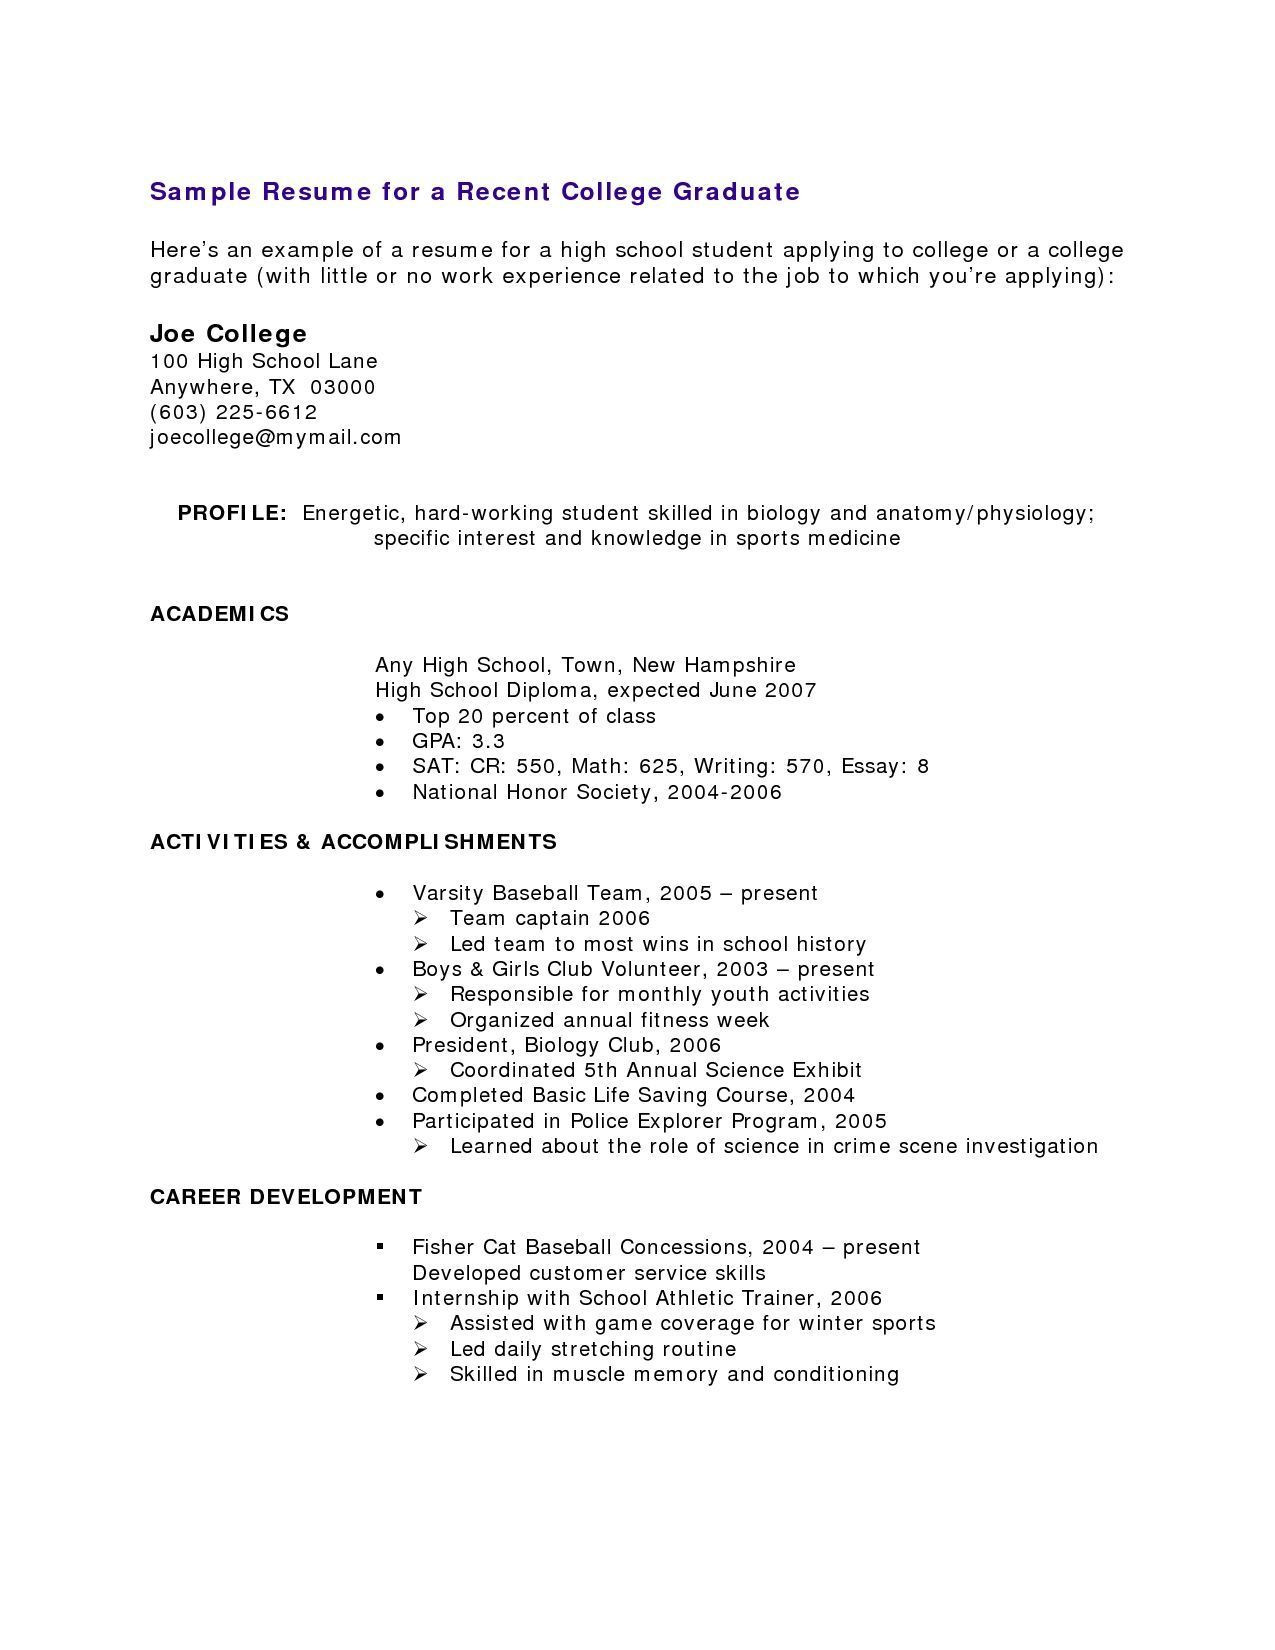 Resume Samples for High School Students with Work Experience Free Resume Templates No Work Experience #experience …